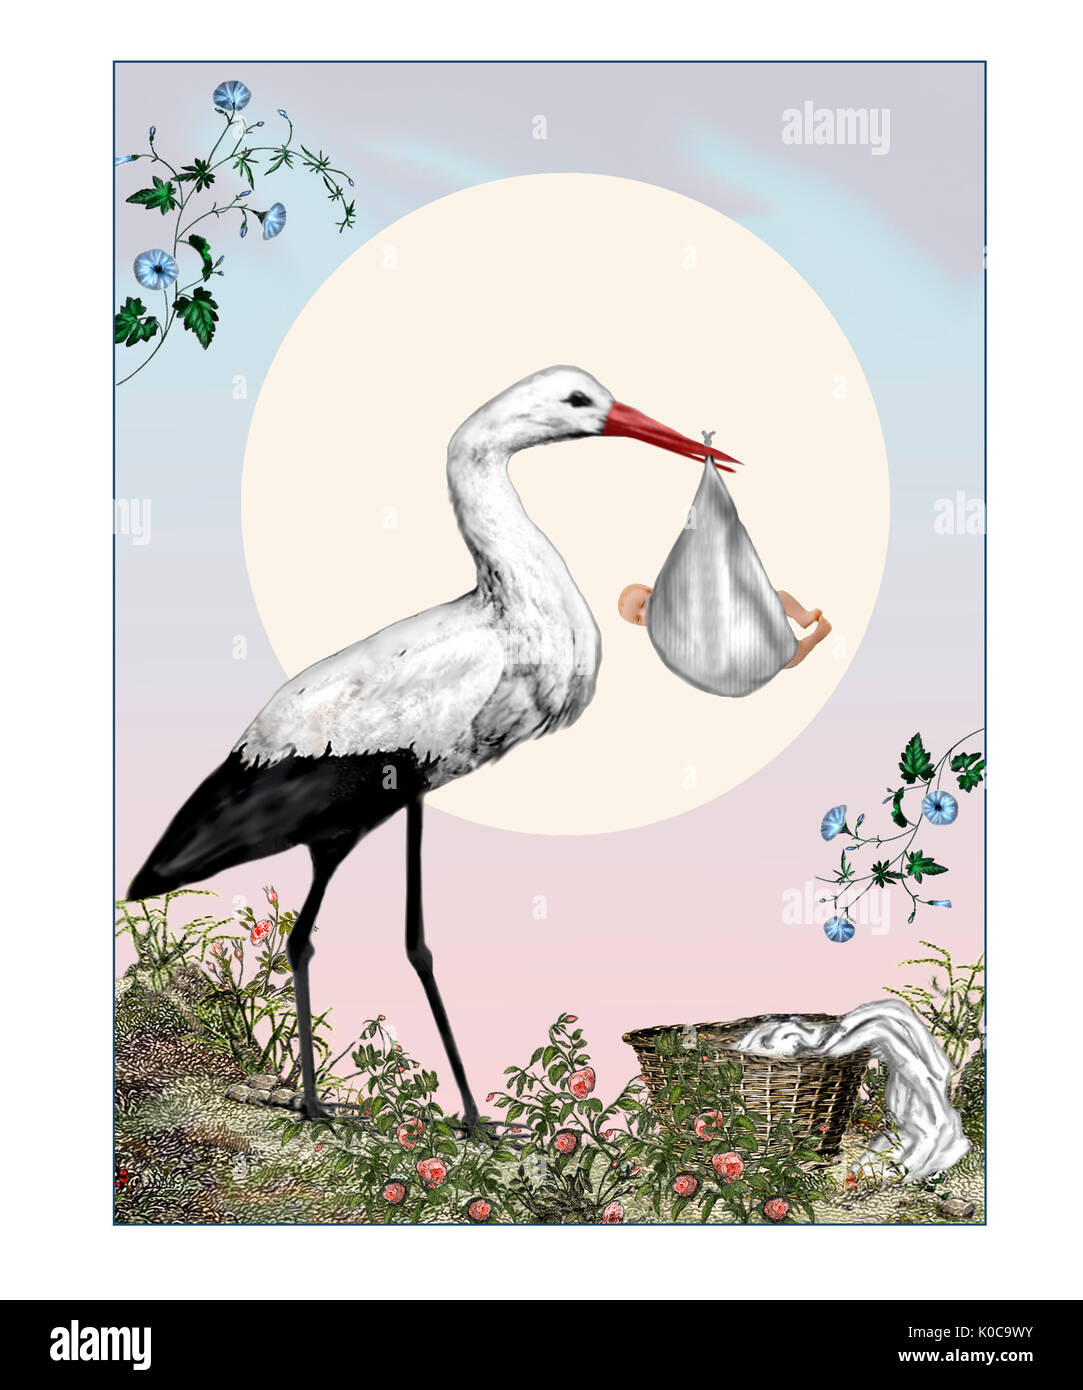 Design new-born baby, Stork with Baby, New Arrival Stock Photo